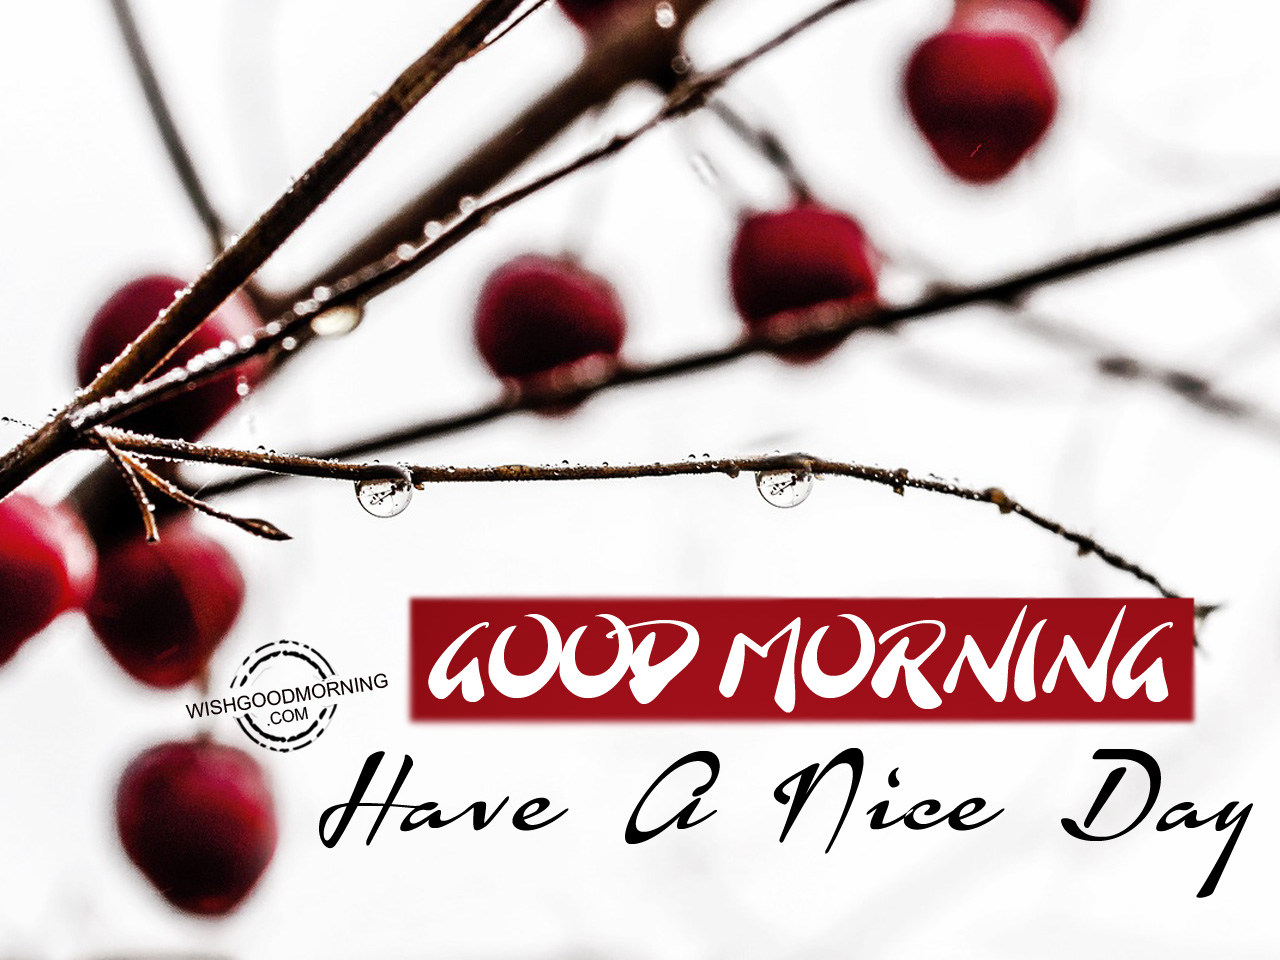 Good Morning Have A Nice Day - Good Morning Pictures – WishGoodMorning.com